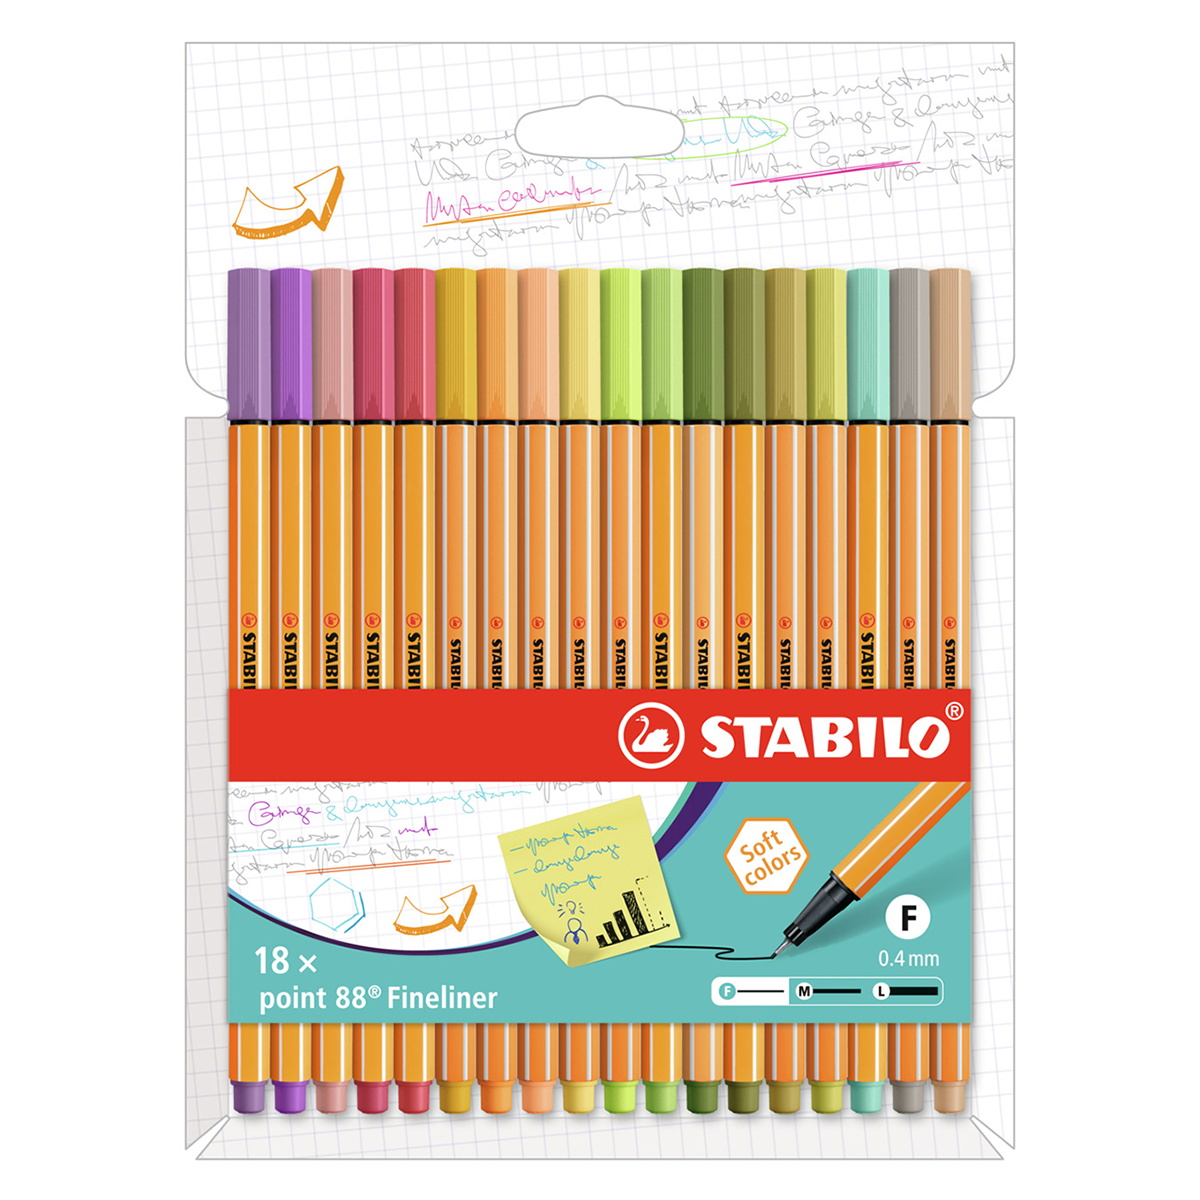 20 Stabilo 88 Book Coloring Pens, Calligraphy, Writing, Drawing